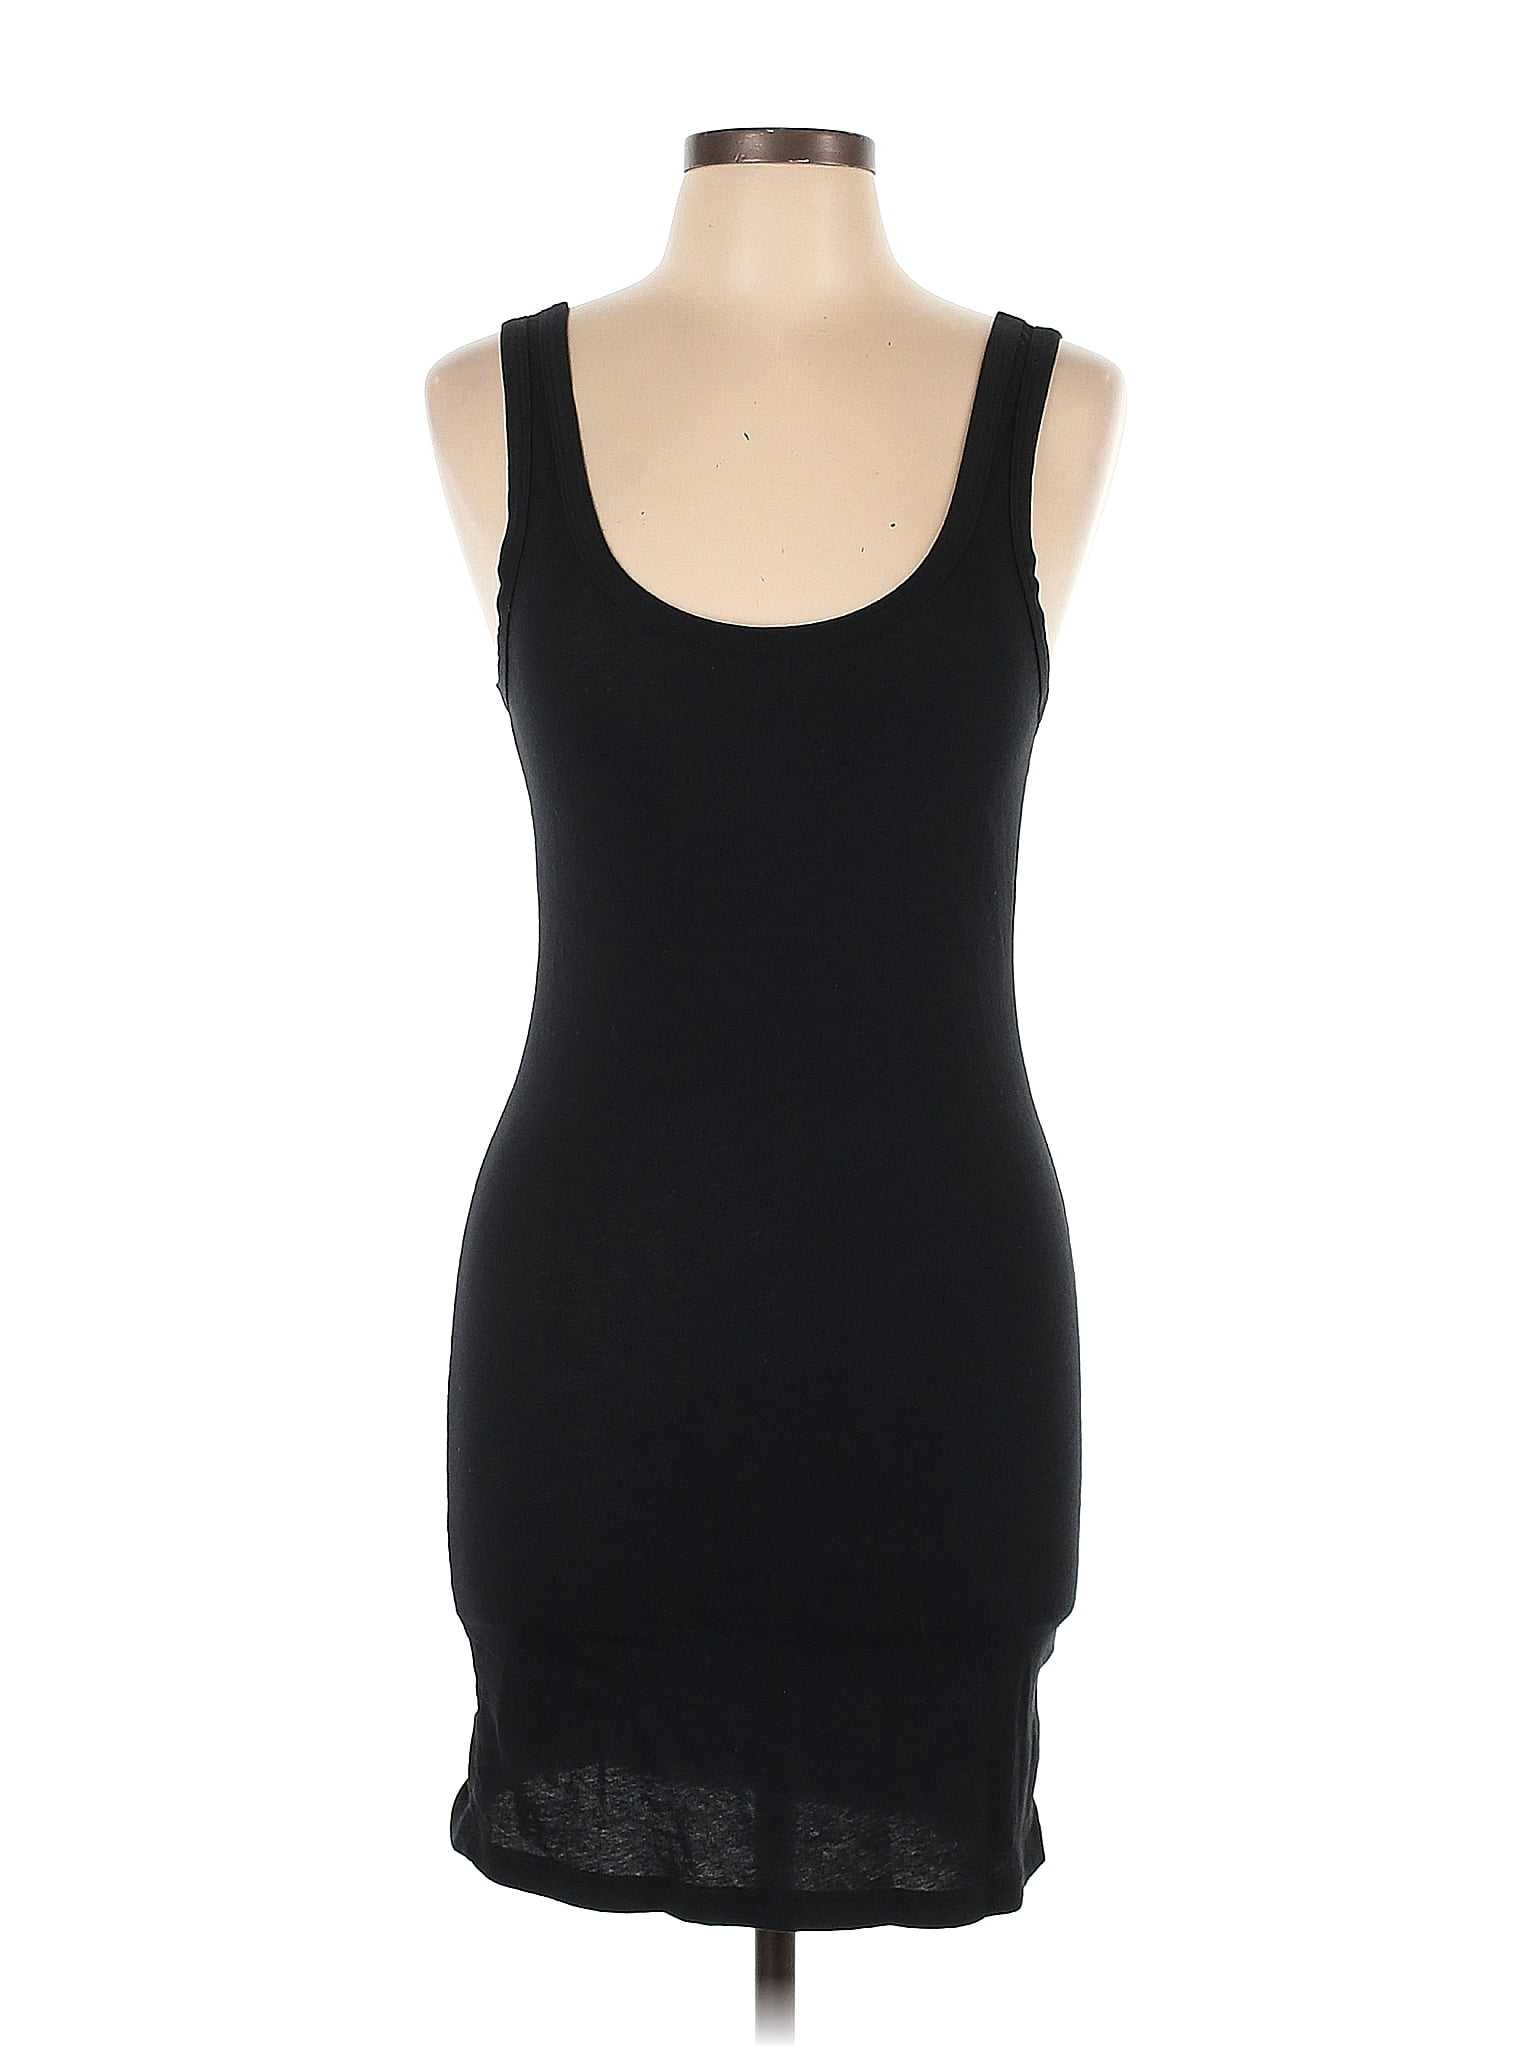 James Perse Solid Black Tank Top Size Lg (3) - 76% off | thredUP